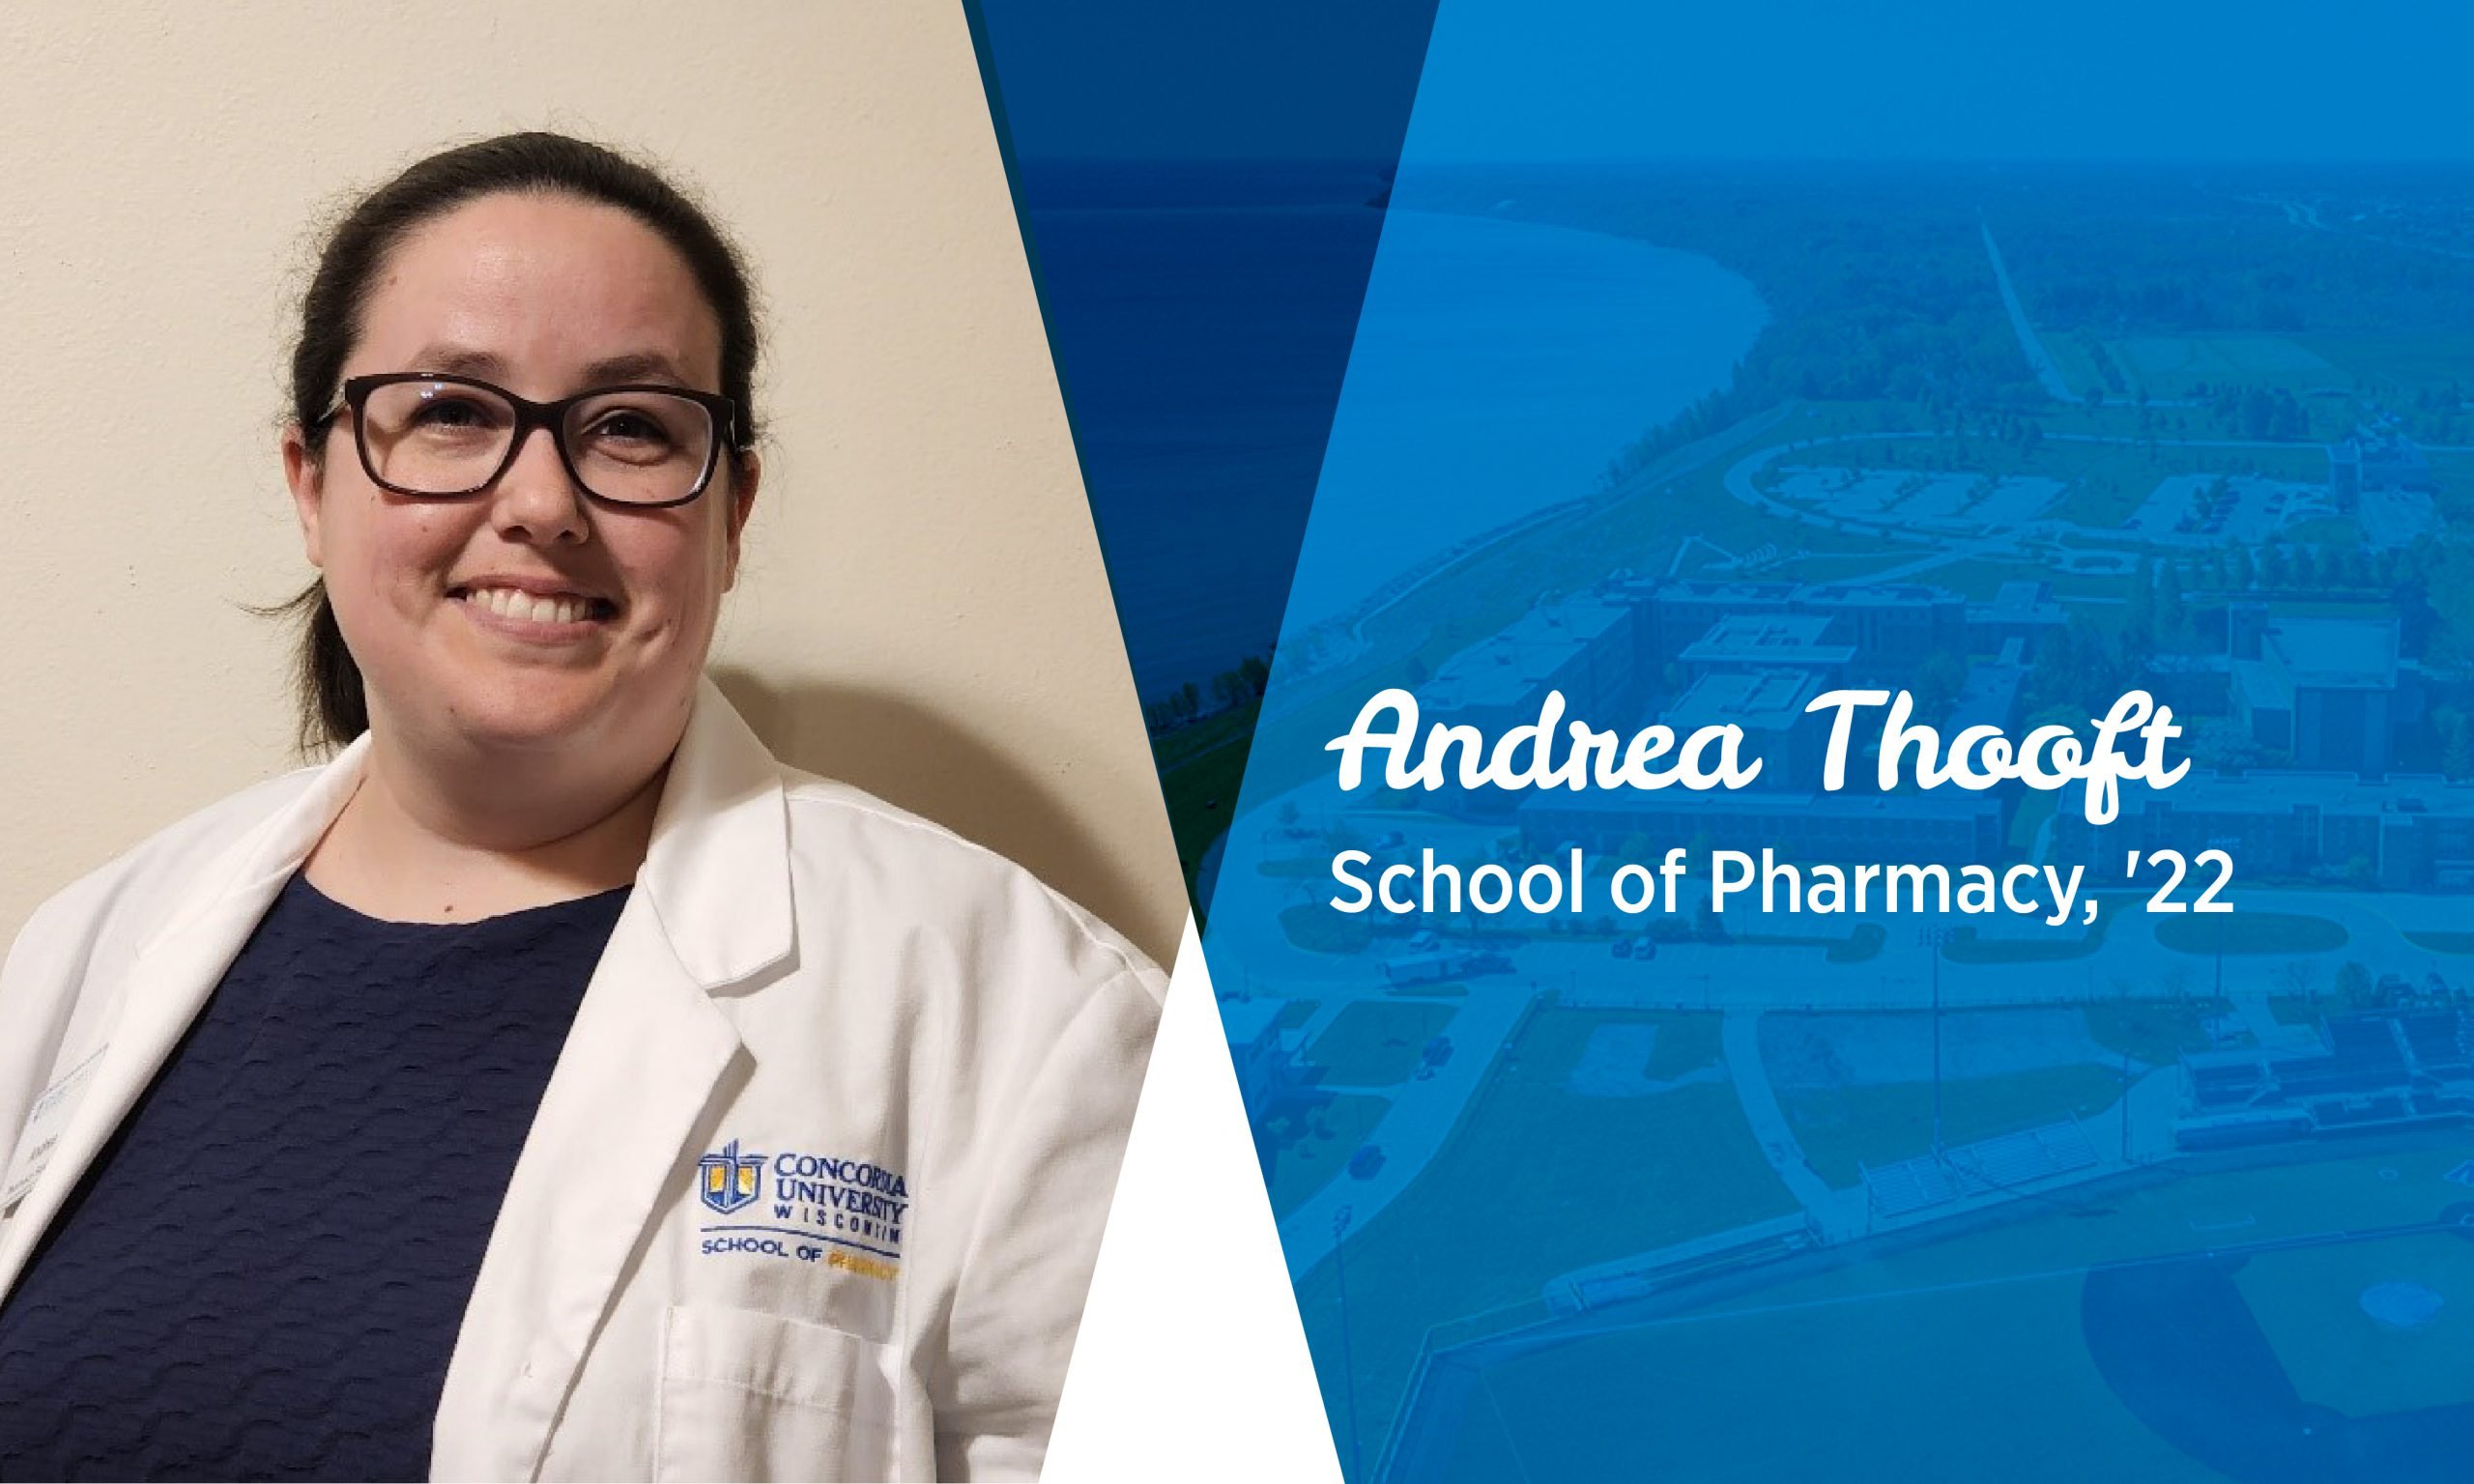 Andrea Thooft shares about her pharmacy school experience